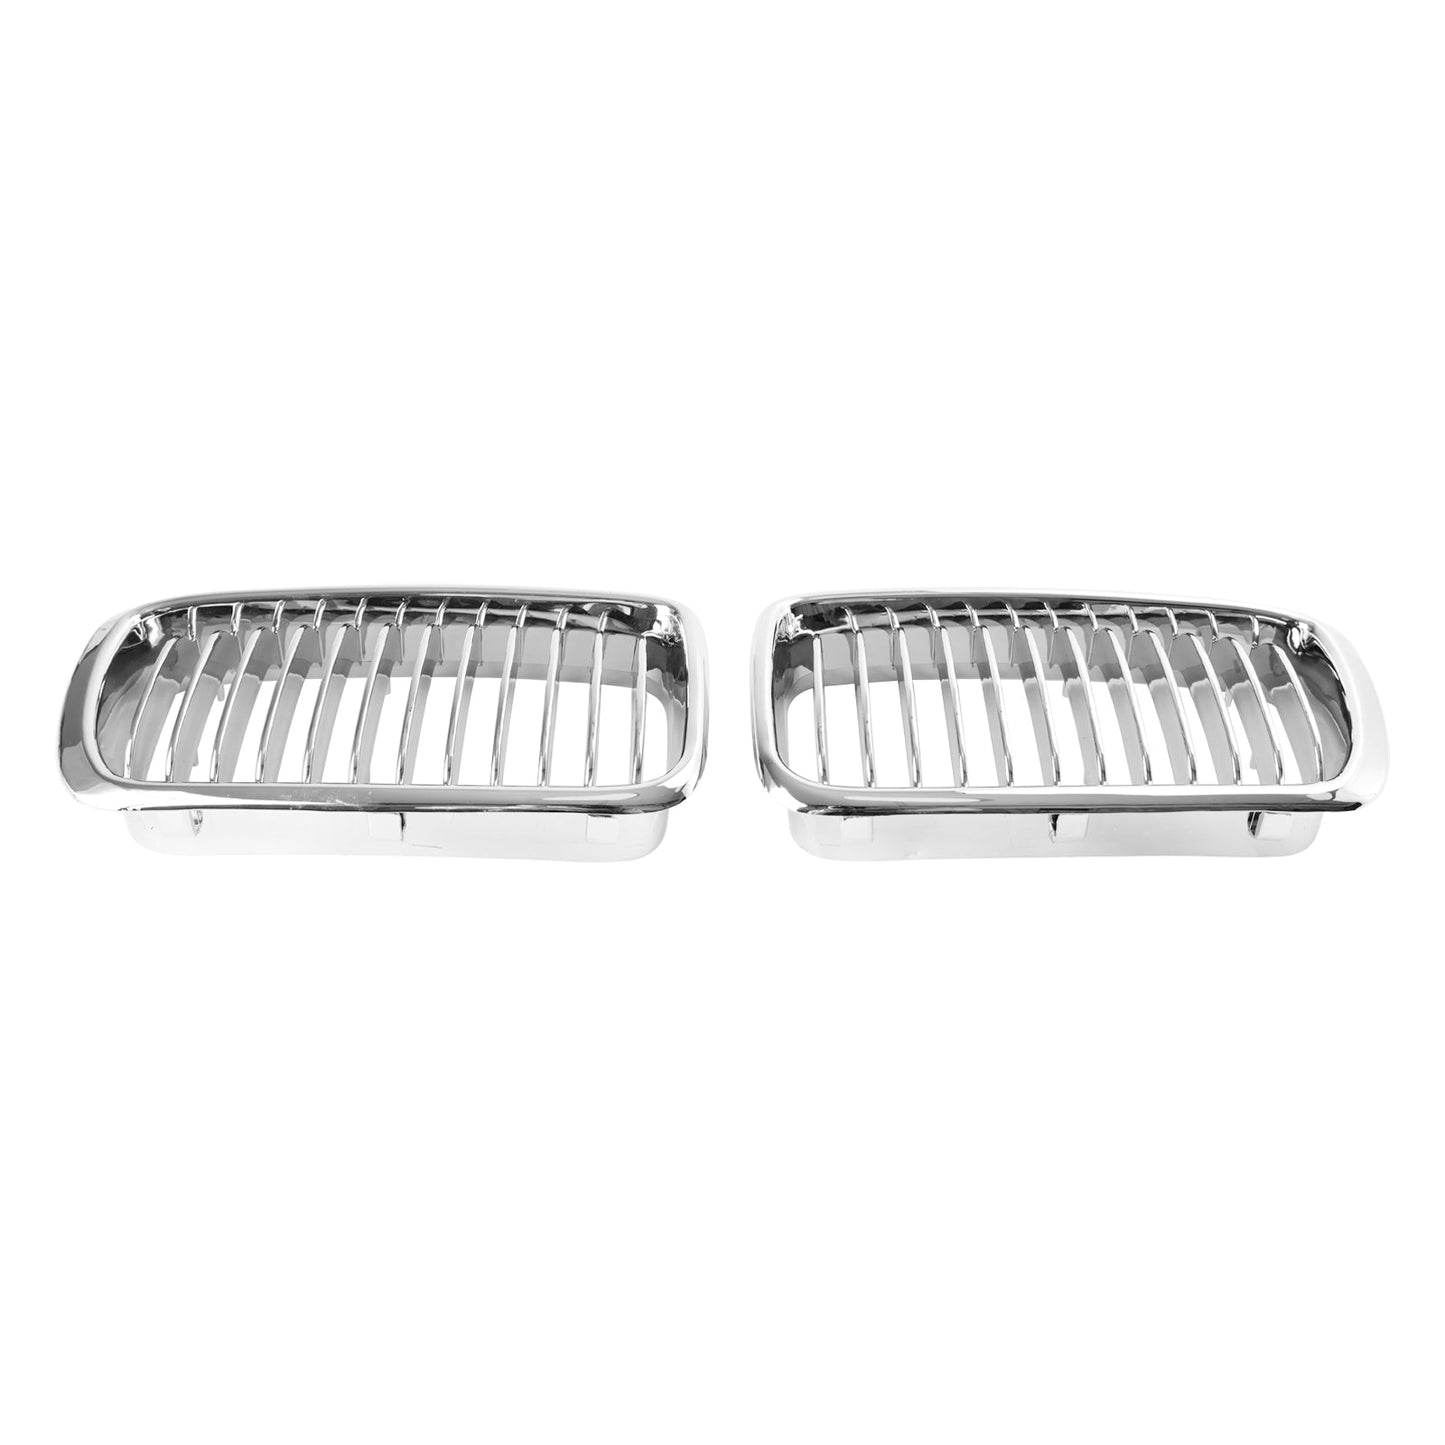 1994-2001 BMW 7 Series E38 Chrome Front Kidney Grill Grille 2PCS